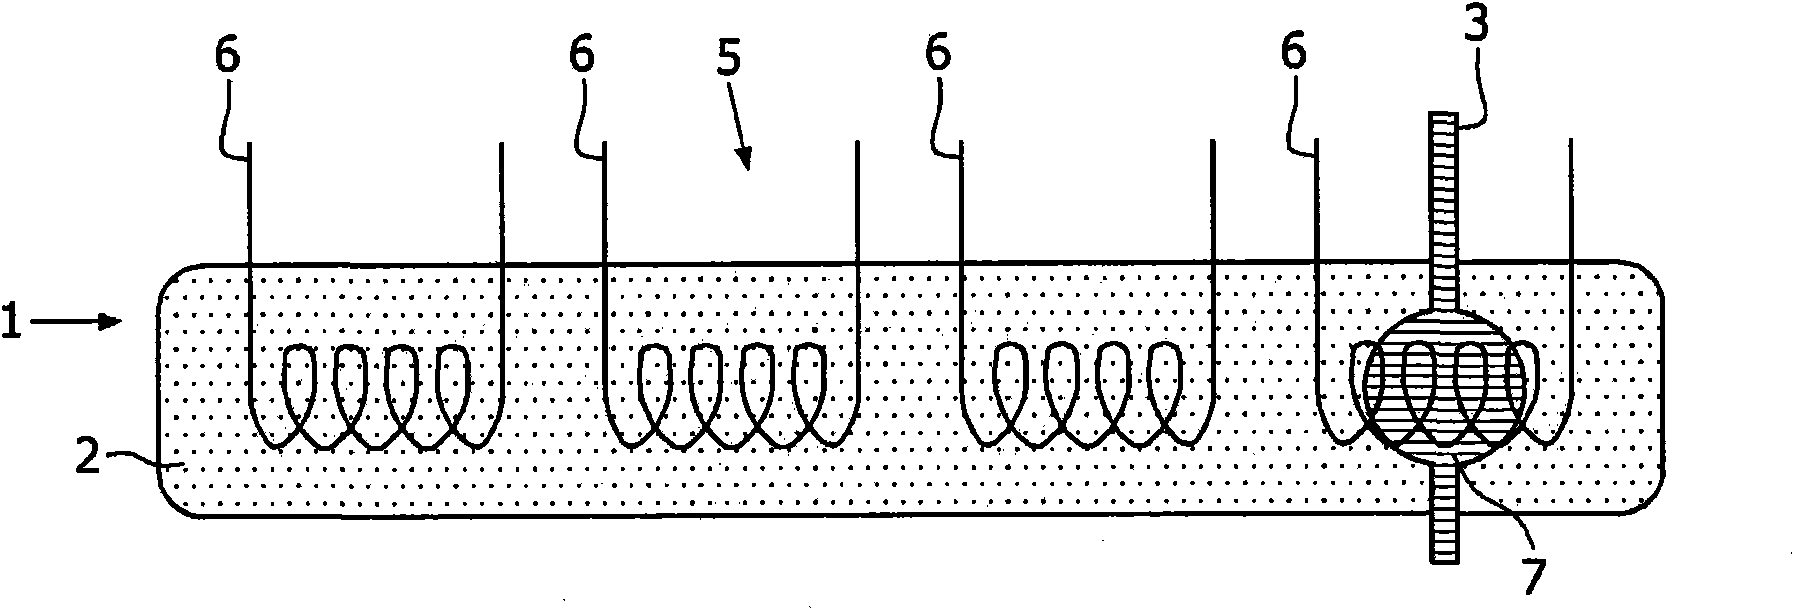 Valve for a microfluidic system